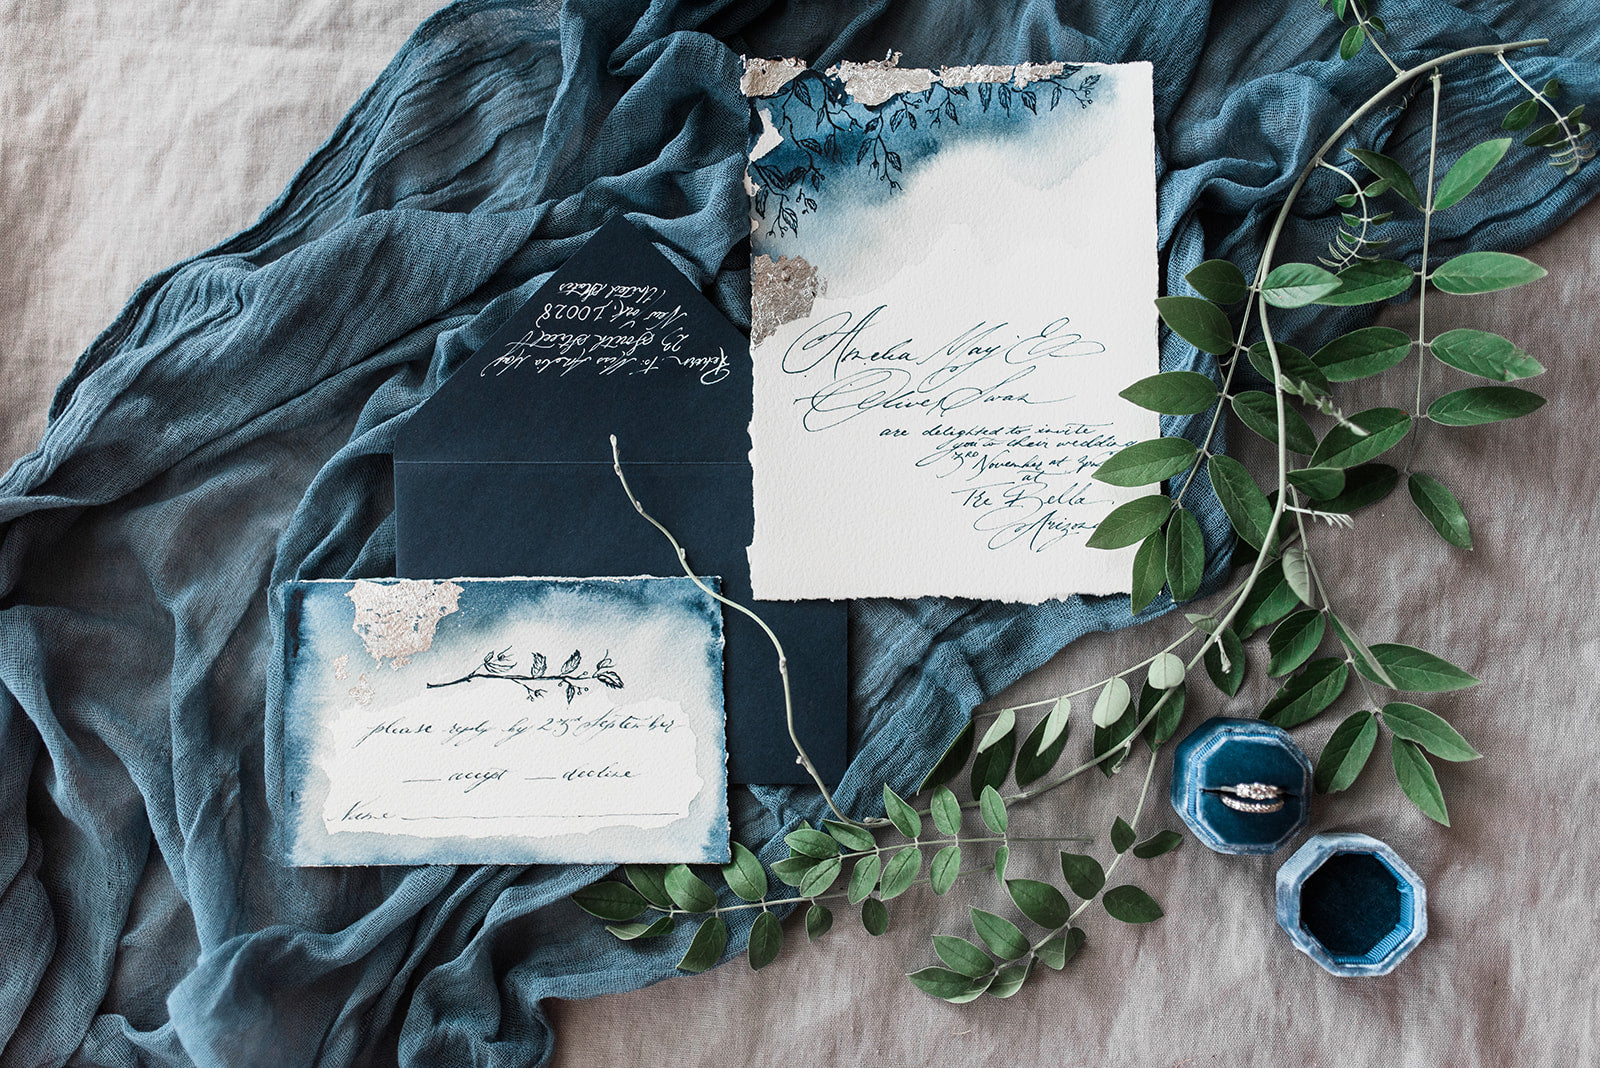 silver foil wedding invitations with elegant relaxed calligraphy for a personal touch. Wedding rings and greenery in a flat lay